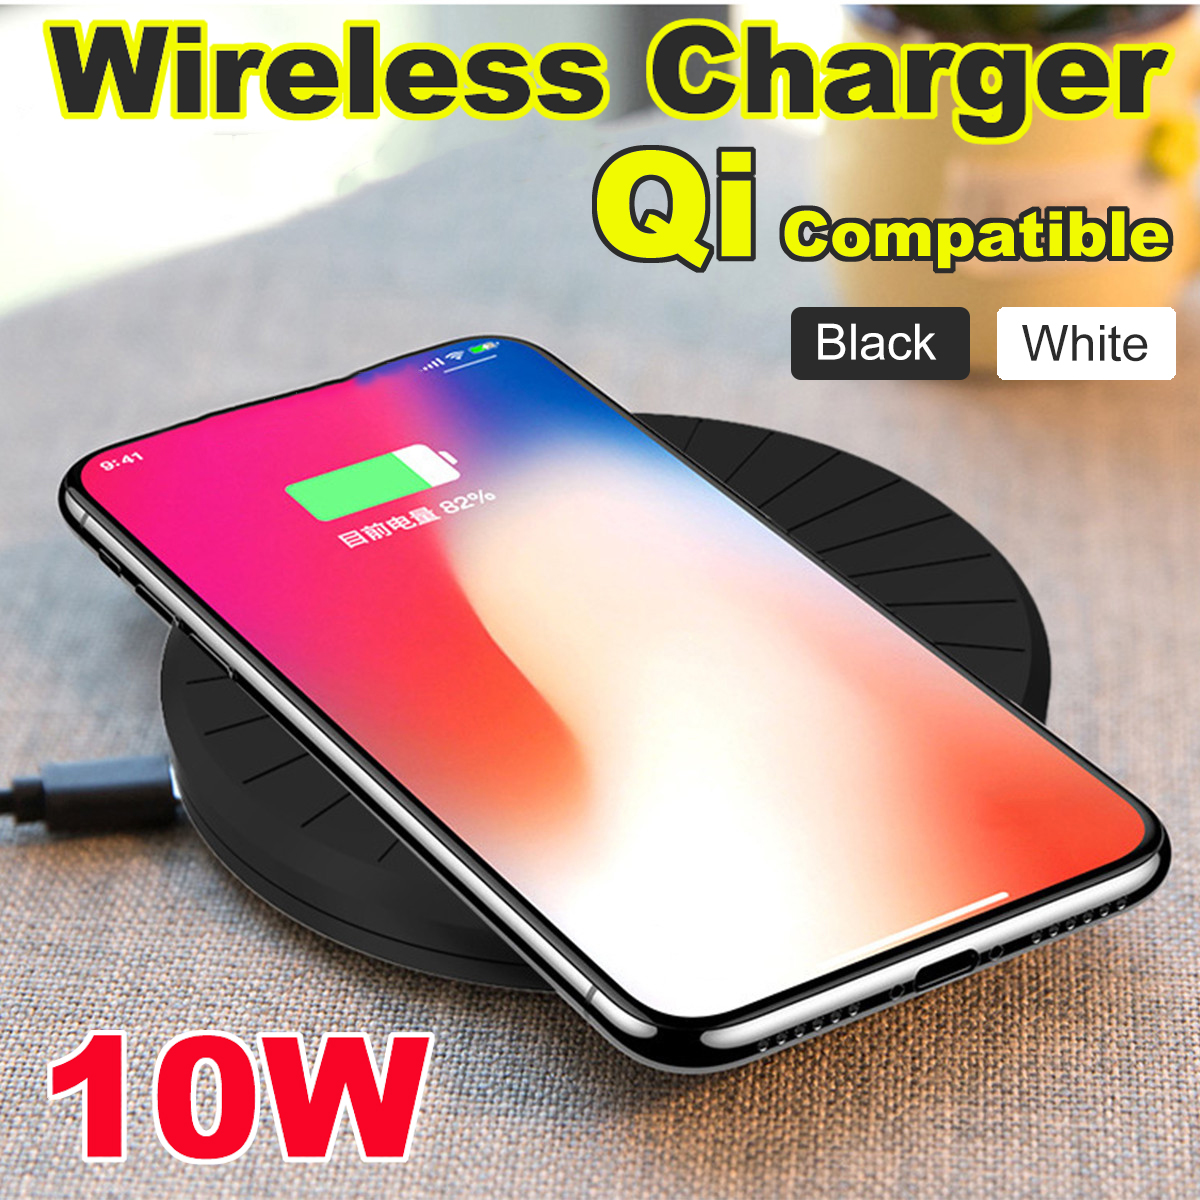 Bakeey 10W Wireless QI Fast Charger Charging Dock Stand Holder Universal For Samsung Galaxy Note 9 S8 S9 S10 Plus For iPhone X XS MAX 8 Plus